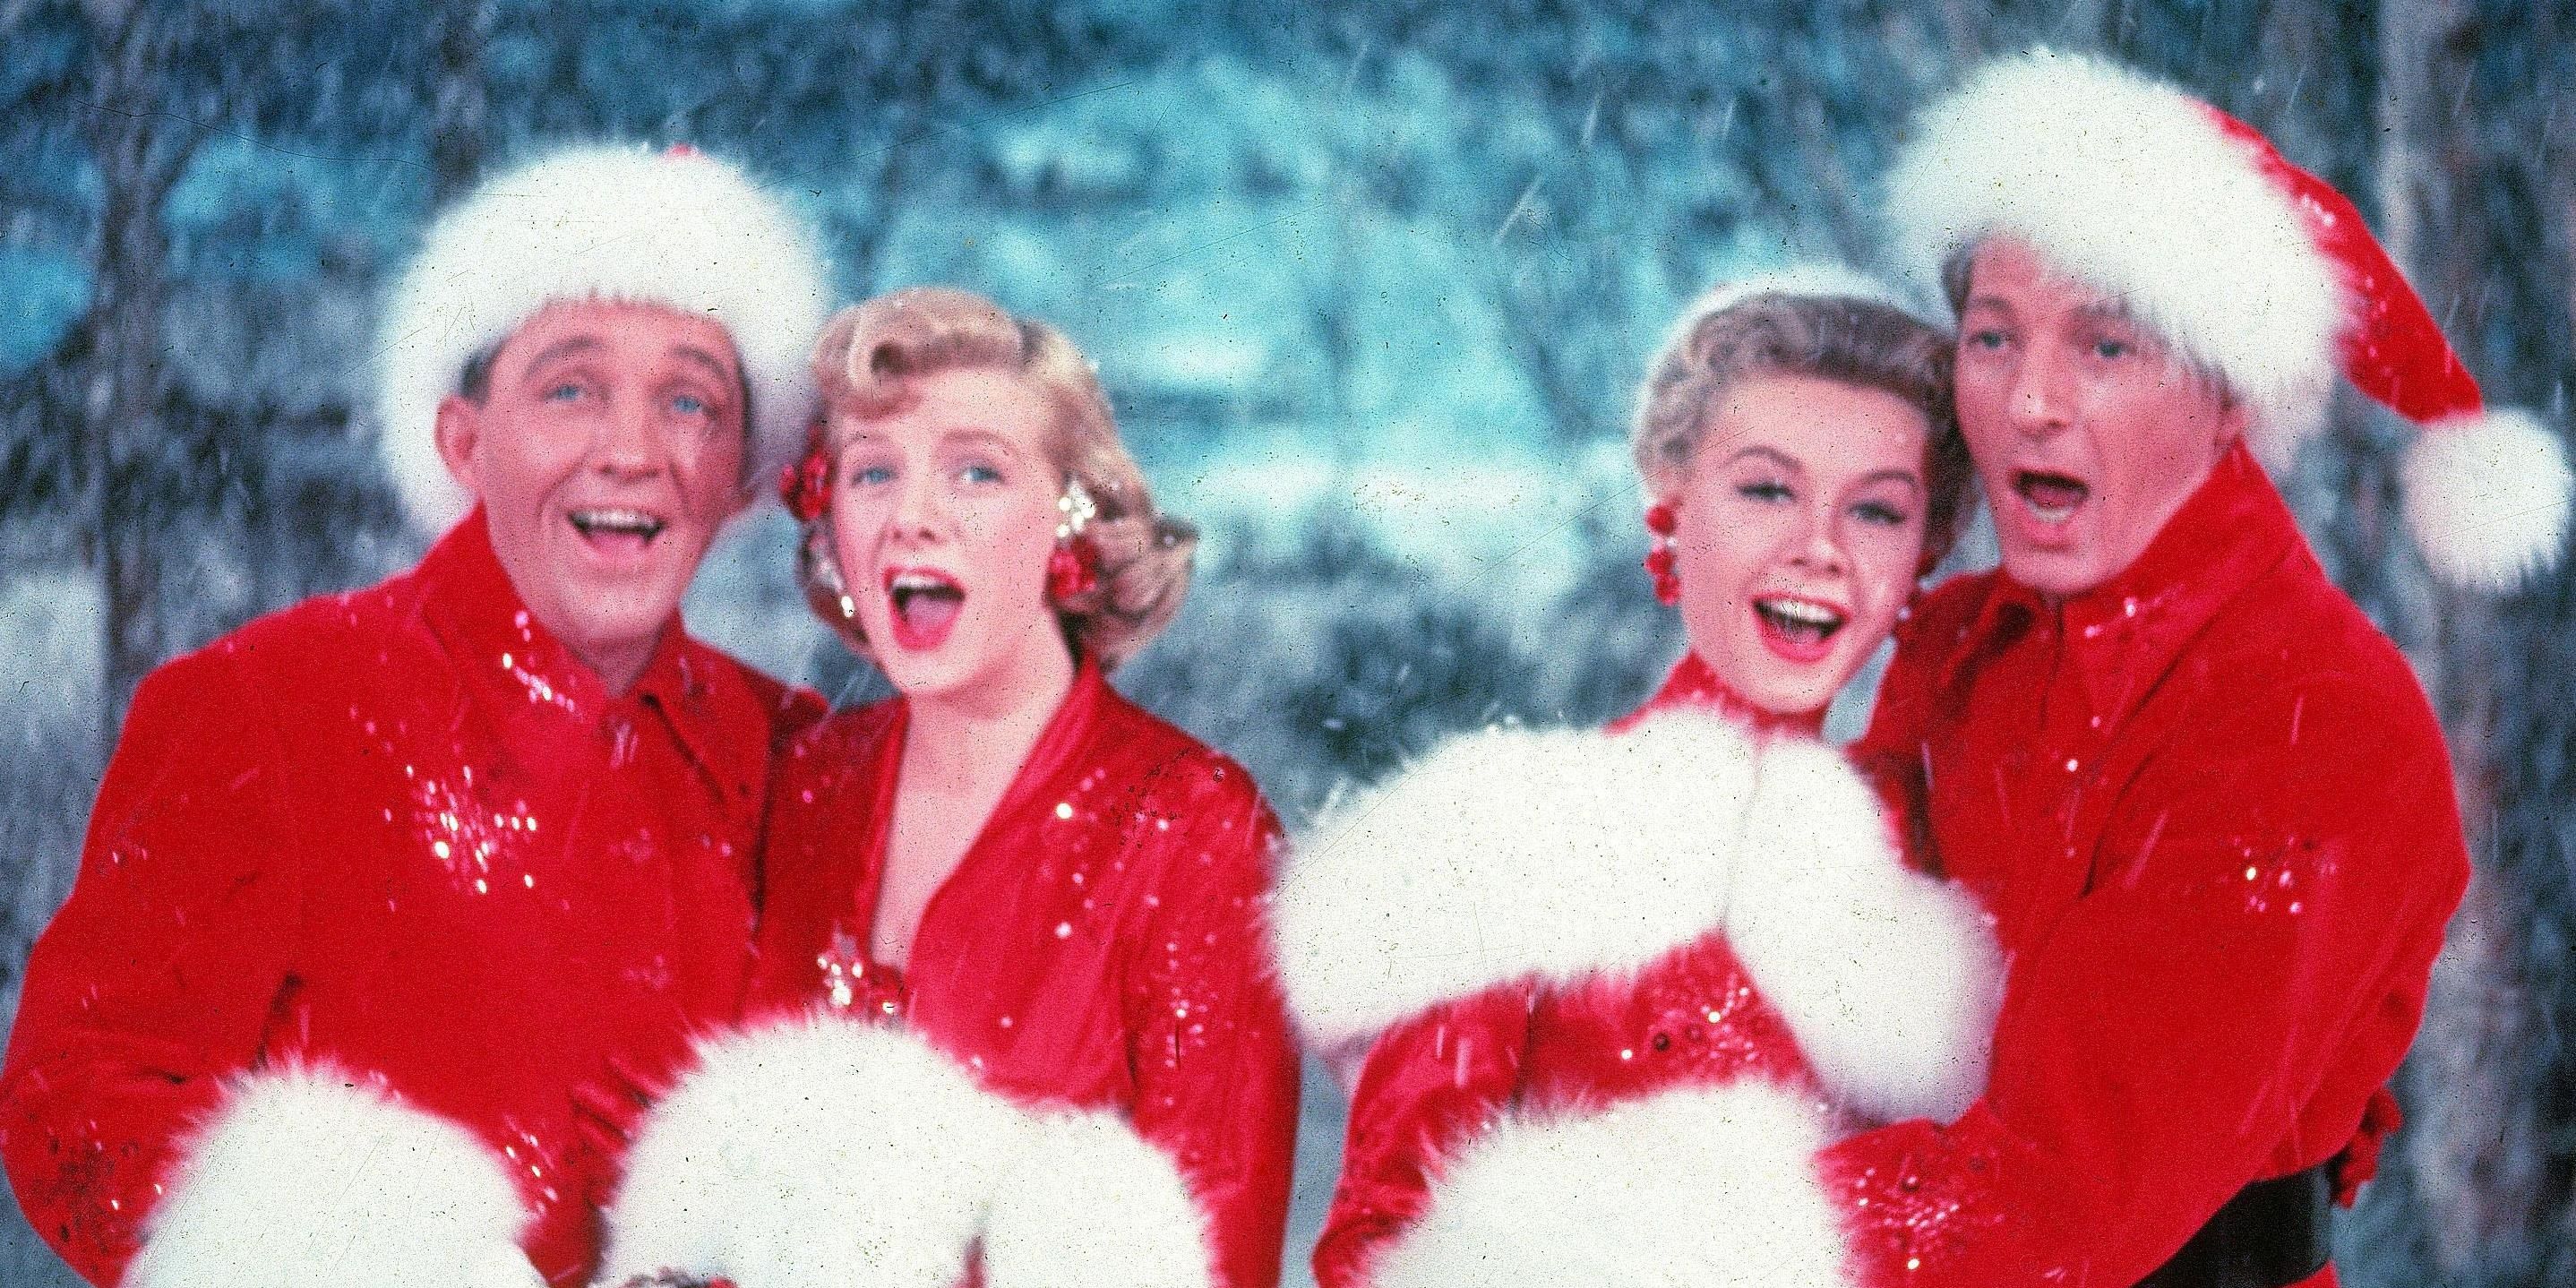 10 Best Movies With Christmas In The Title According To IMDb